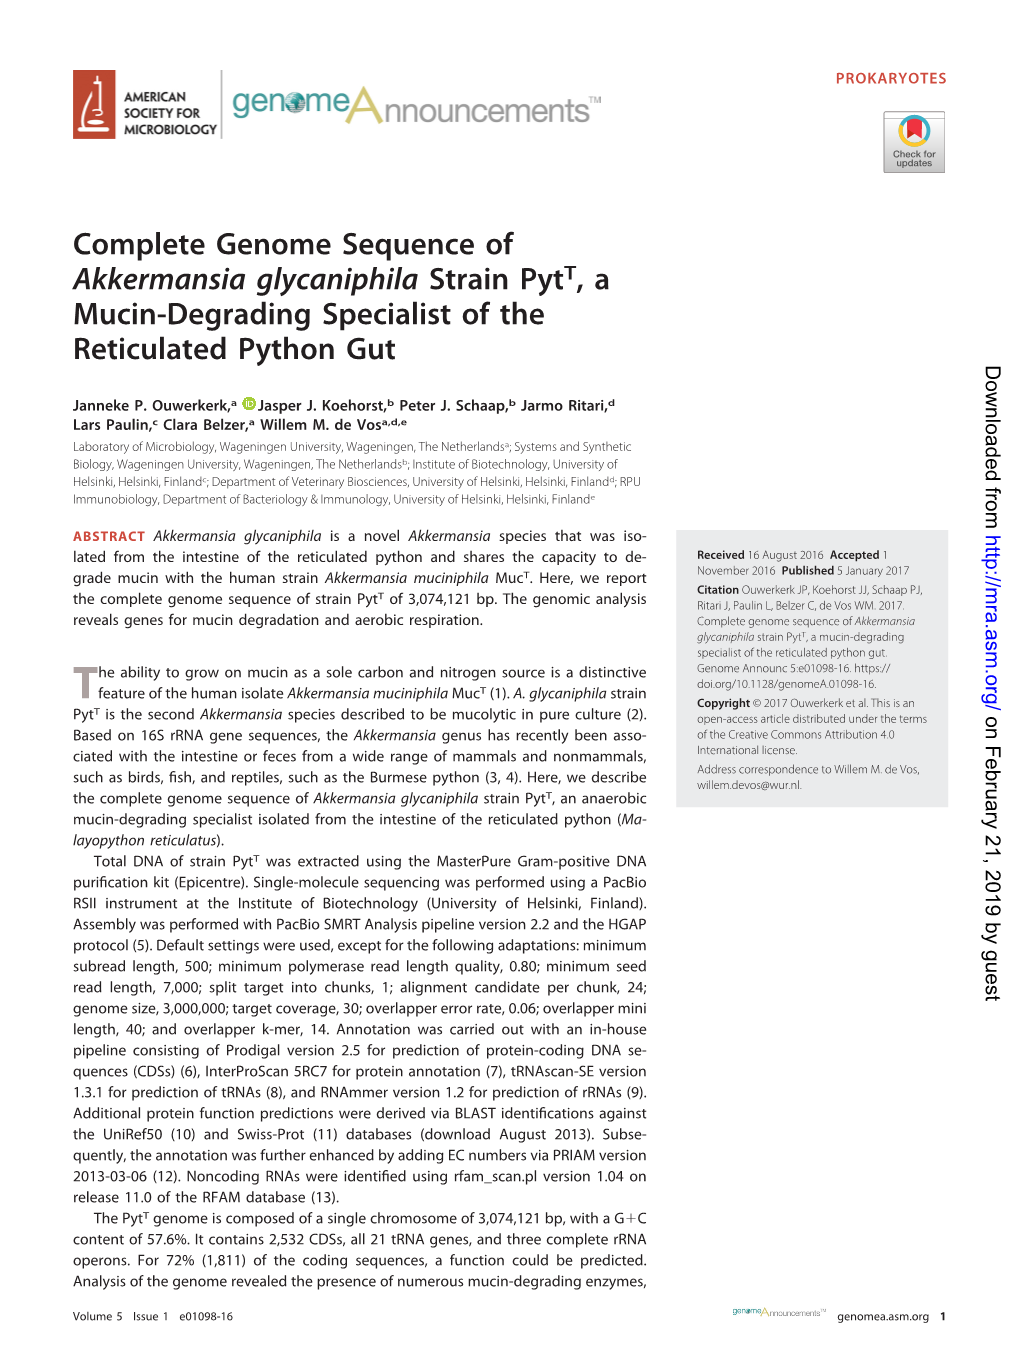 Complete Genome Sequence of Akkermansia Glycaniphila Strain Pytt, a Mucin-Degrading Specialist of the Reticulated Python Gut